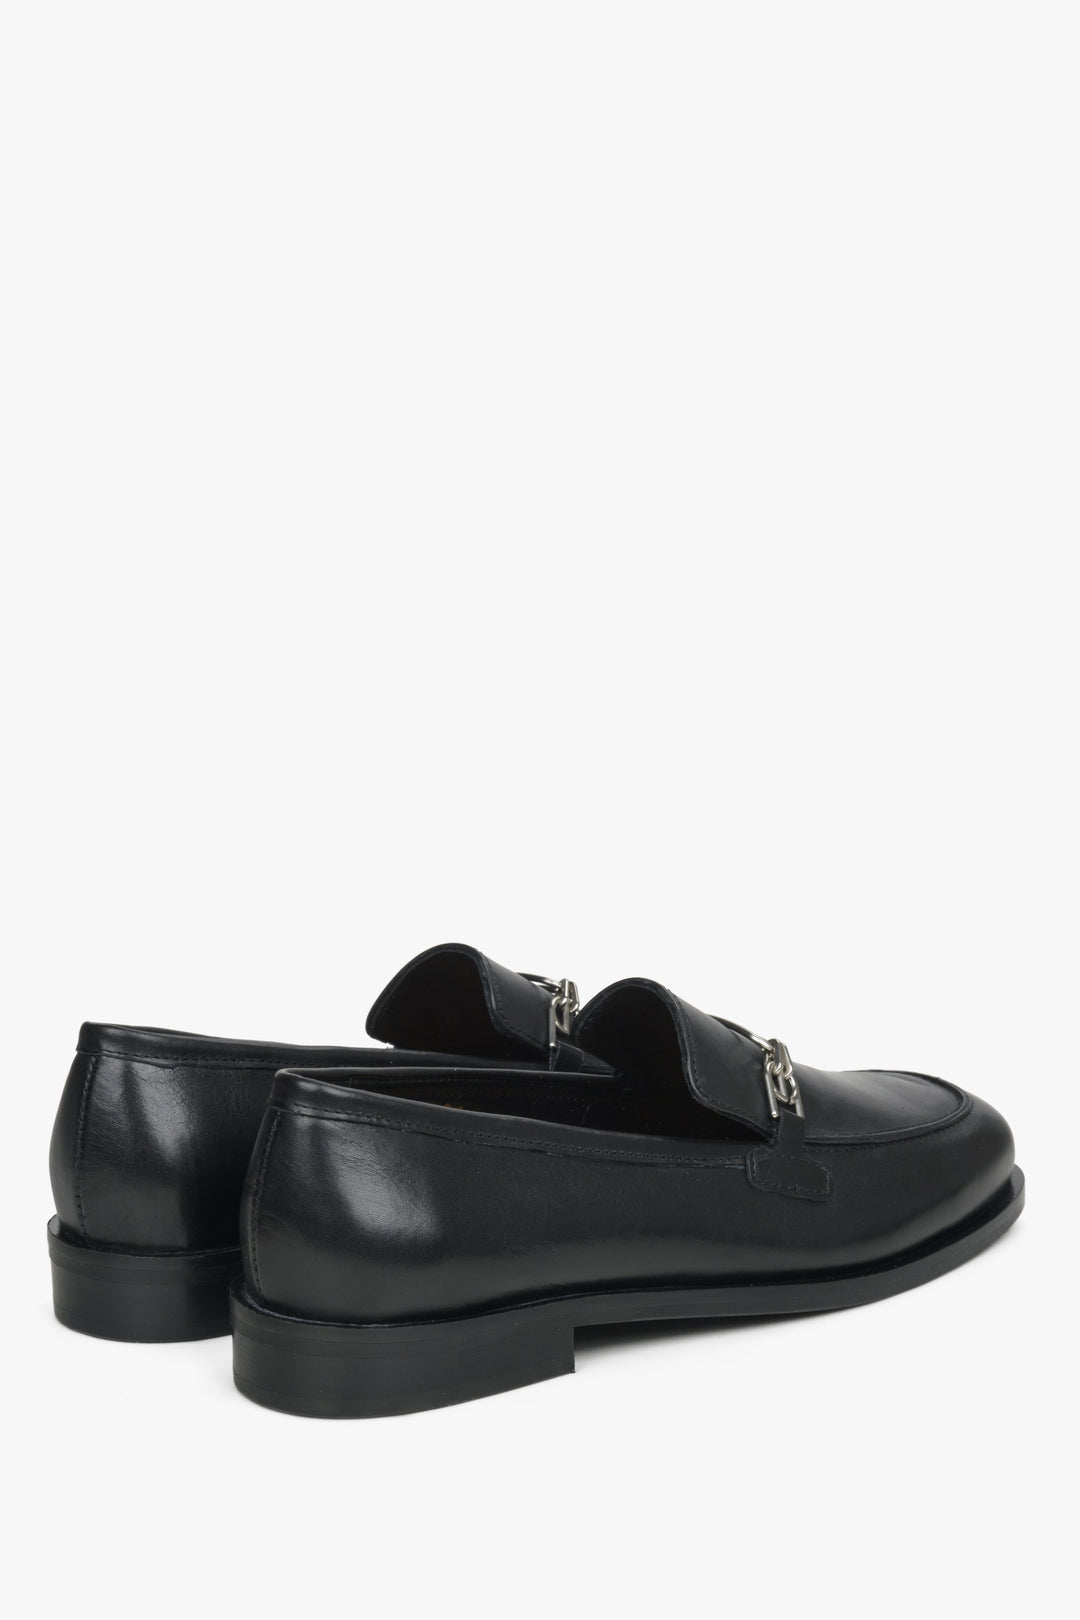 Women's black penny loafers Estro - a close-up on shoe heel counter.